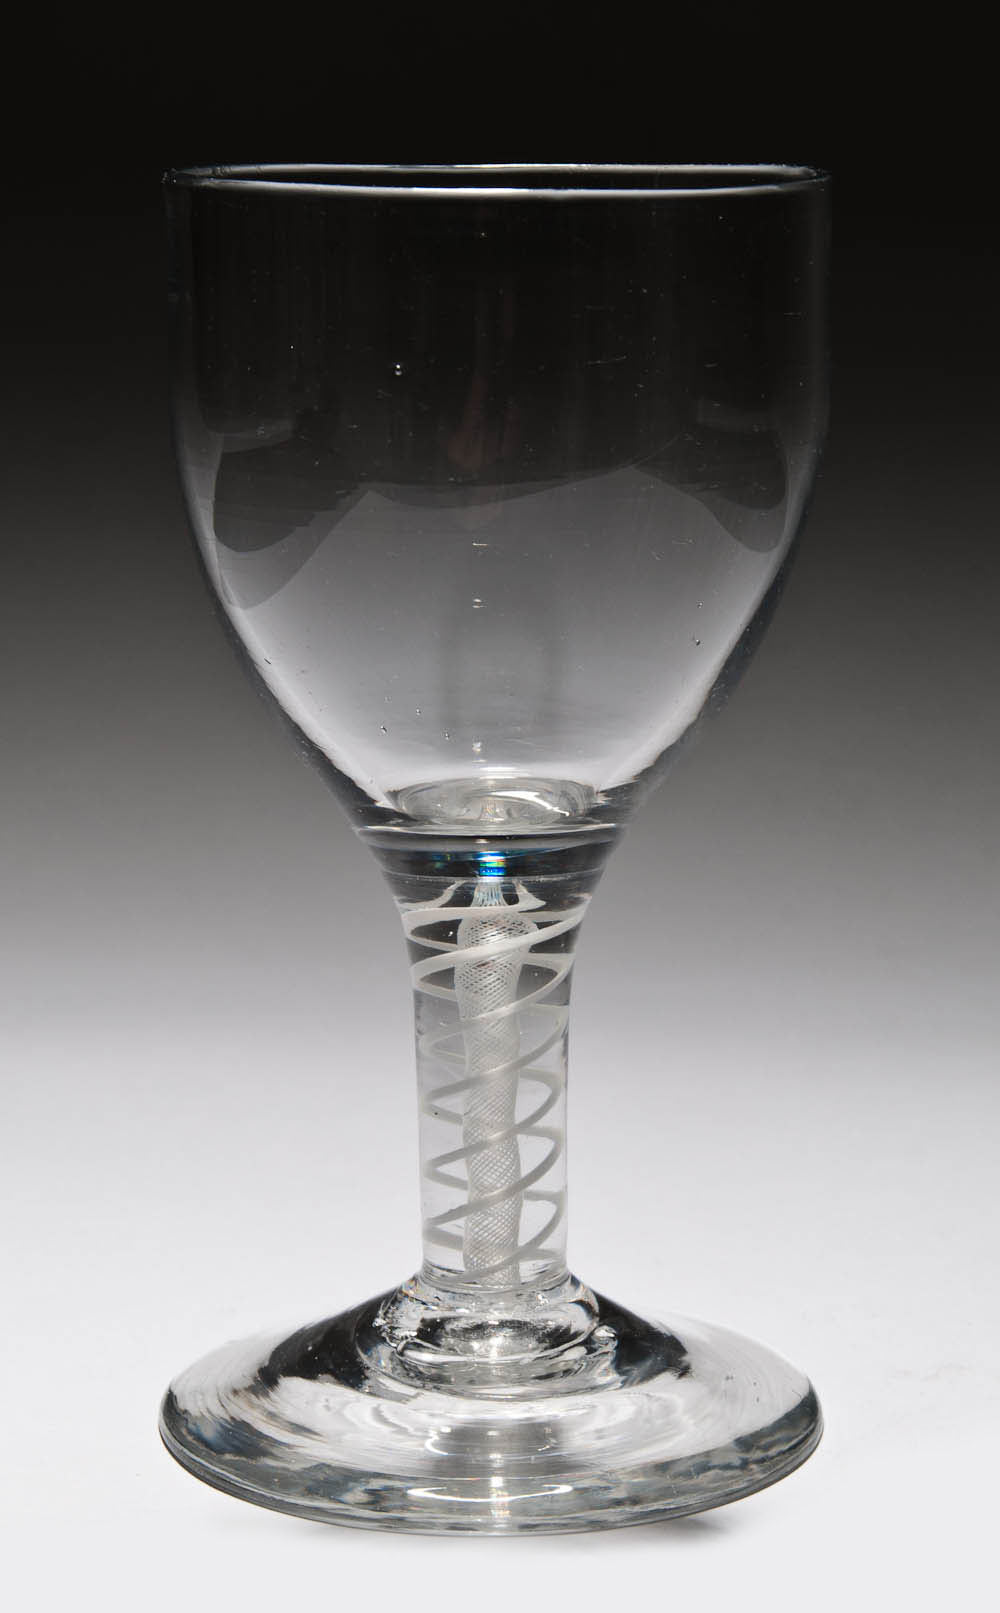 A Georgian English Lead Glass Wine Goblet with DSOT Opaque Twist Stem c1765 (Code 7493) - Blue Cherry Antiques - 1